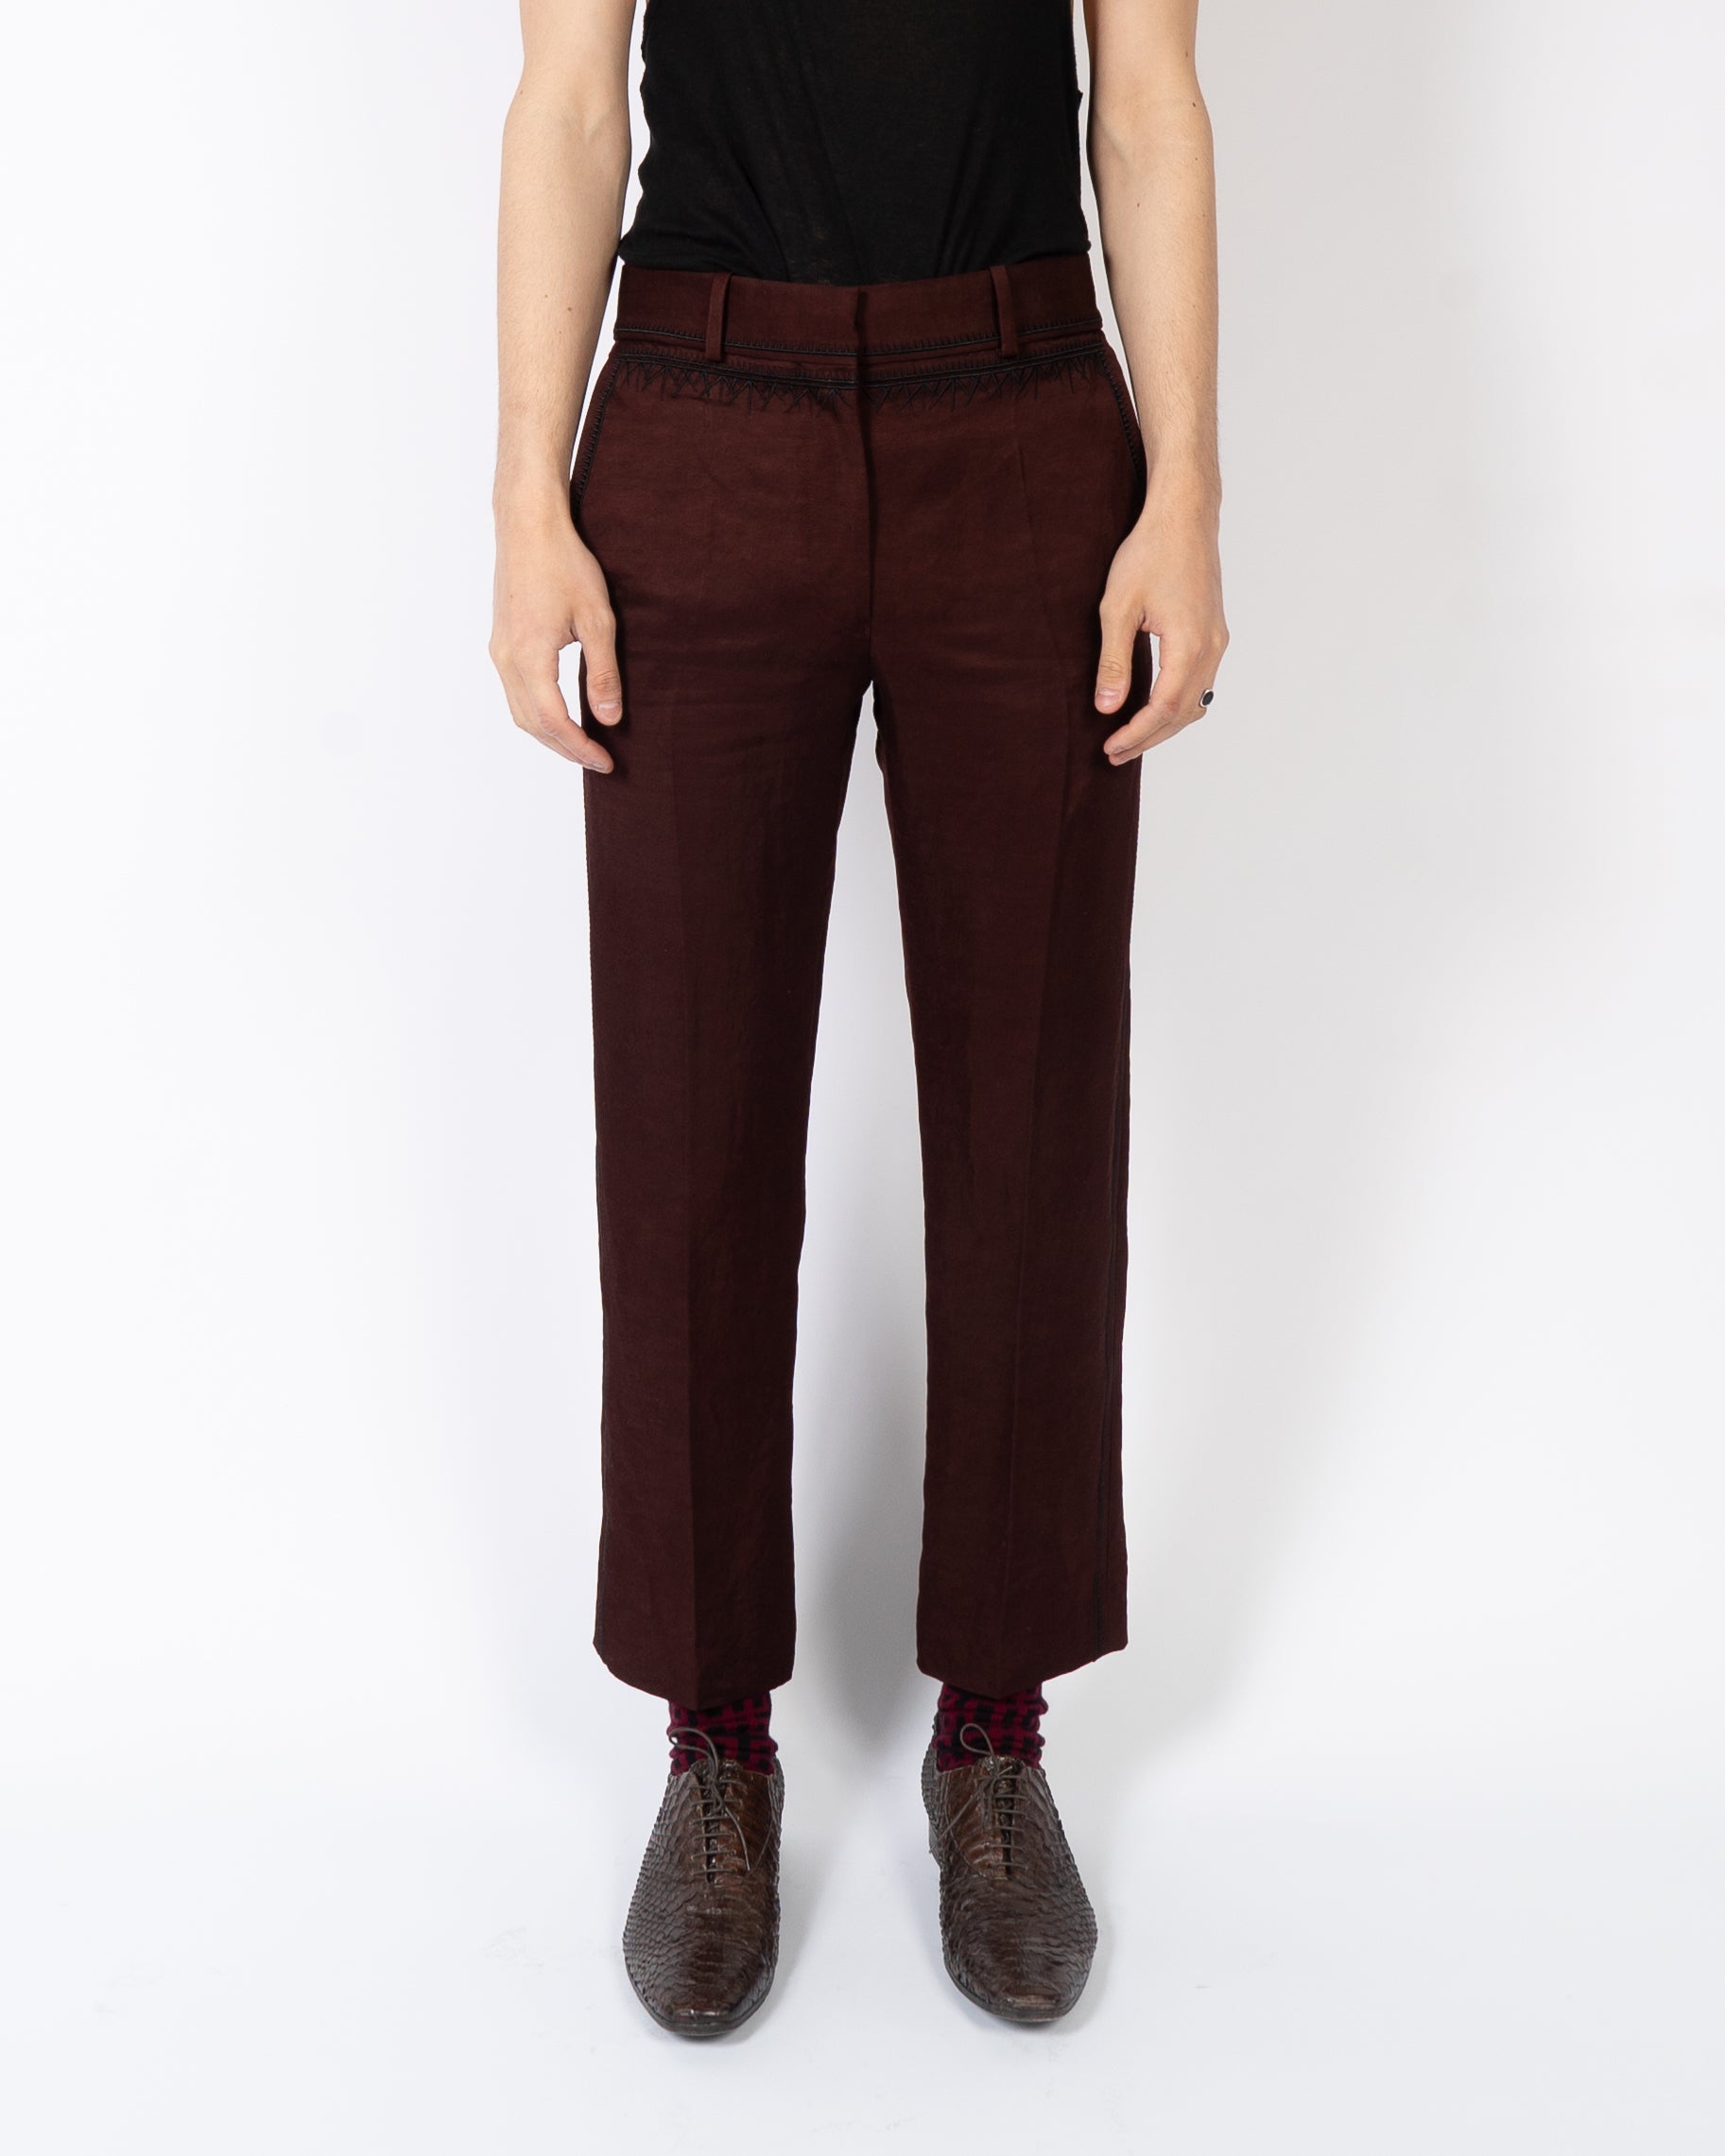 SS19 Embroidered Chocolate Trousers